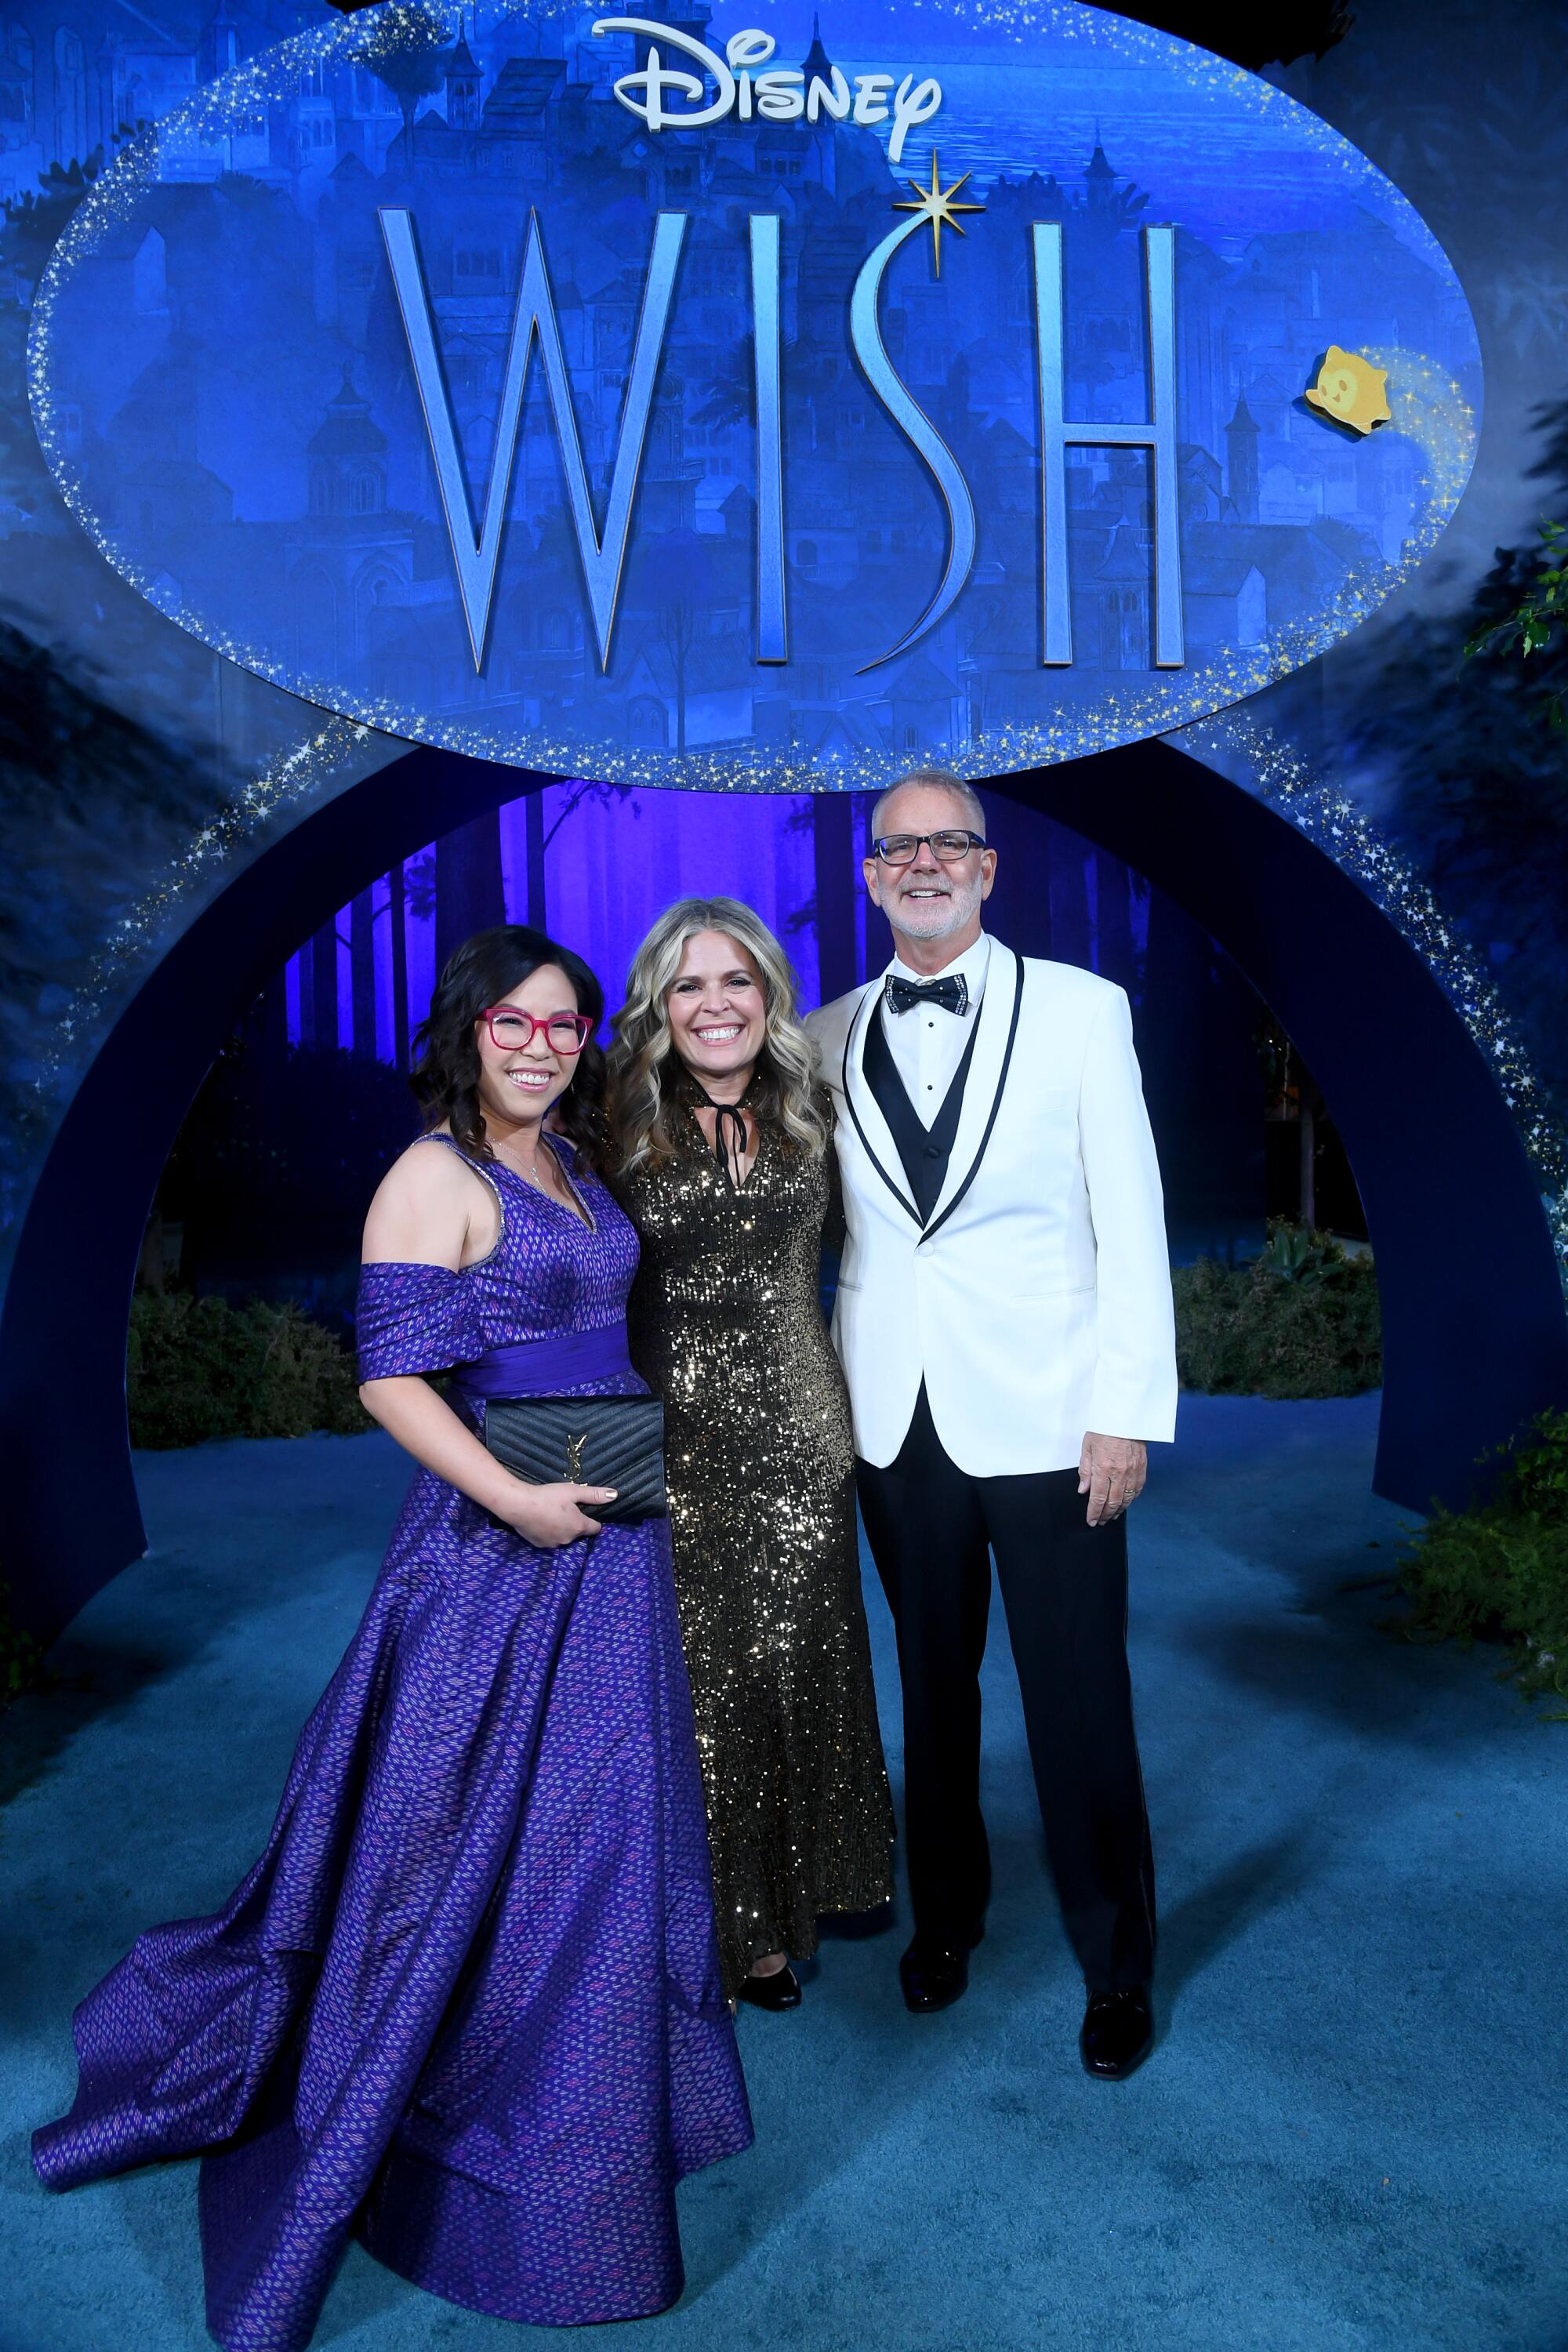 Fawn Veerasunthorn, Jennifer Lee and Chris Buck at the "Wish" premiere